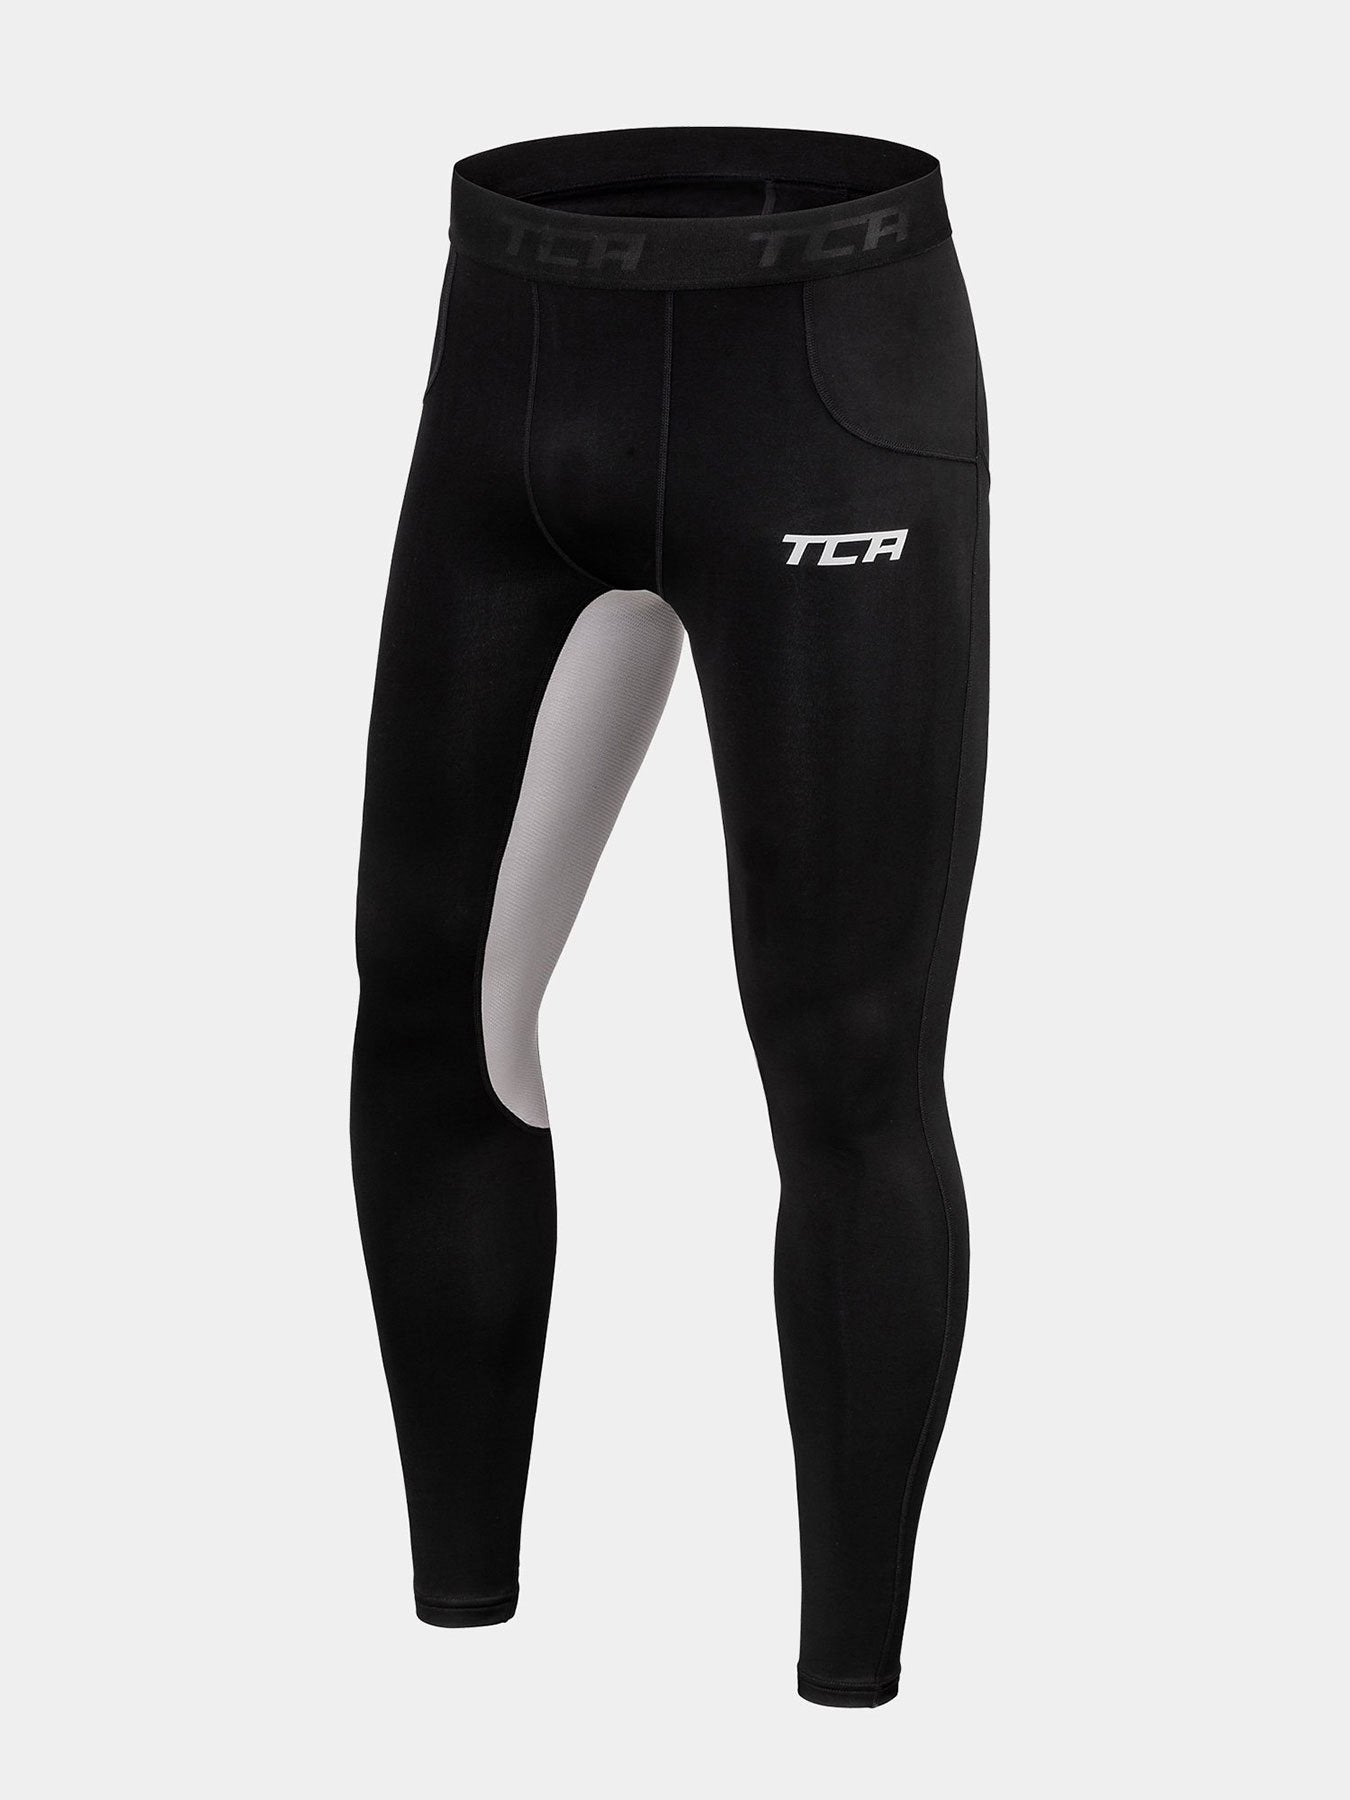 SuperThermal Compression Base Layer Tights For Boys With Brushed Inner Fabric & Side Pocket